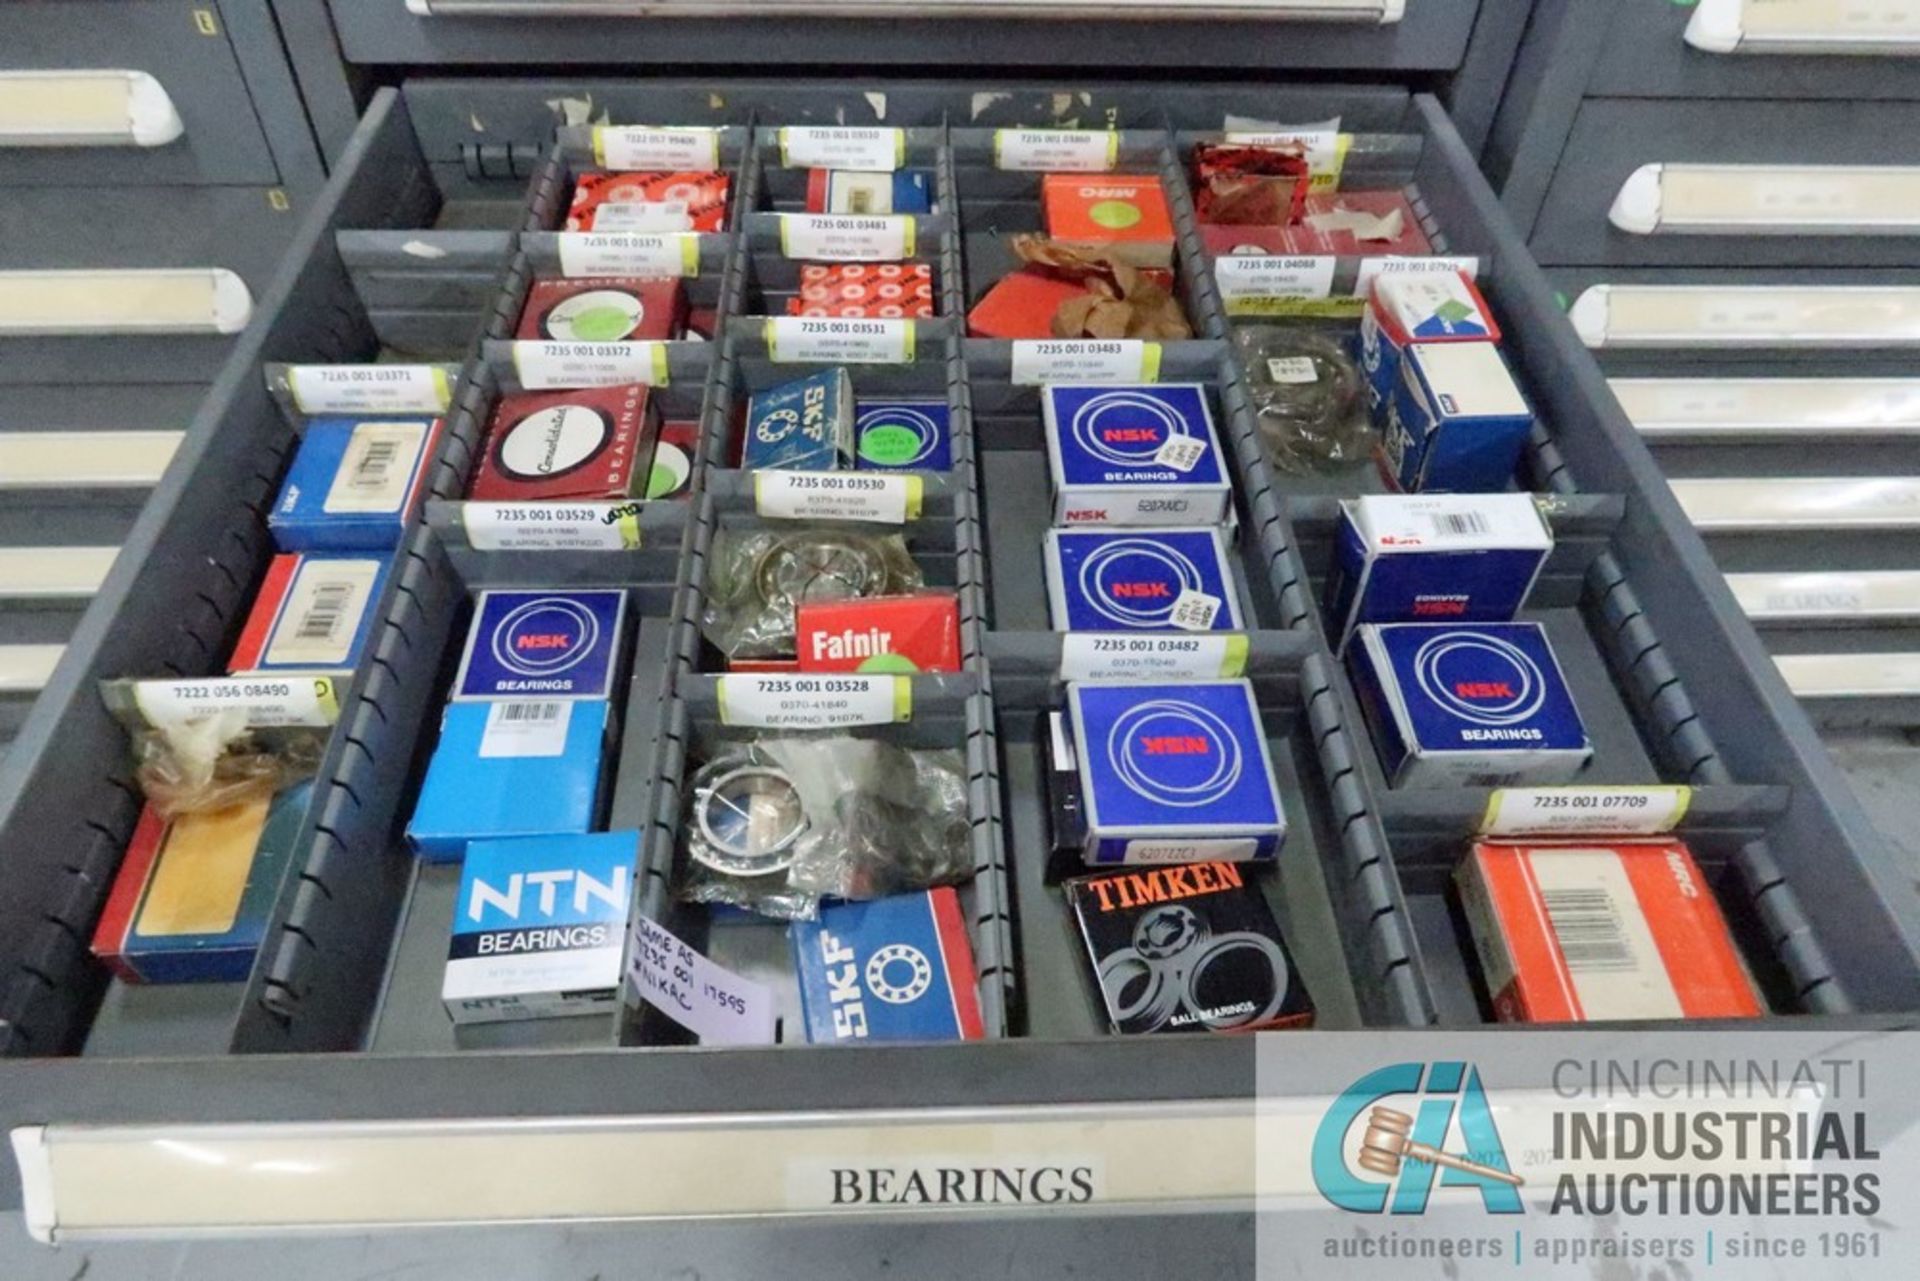 13-DRAWER VIDMAR CABINET WITH CONTENTS INCLUDING MISCELLANEOUS BEARINGS (CABINET CD) - Image 10 of 14